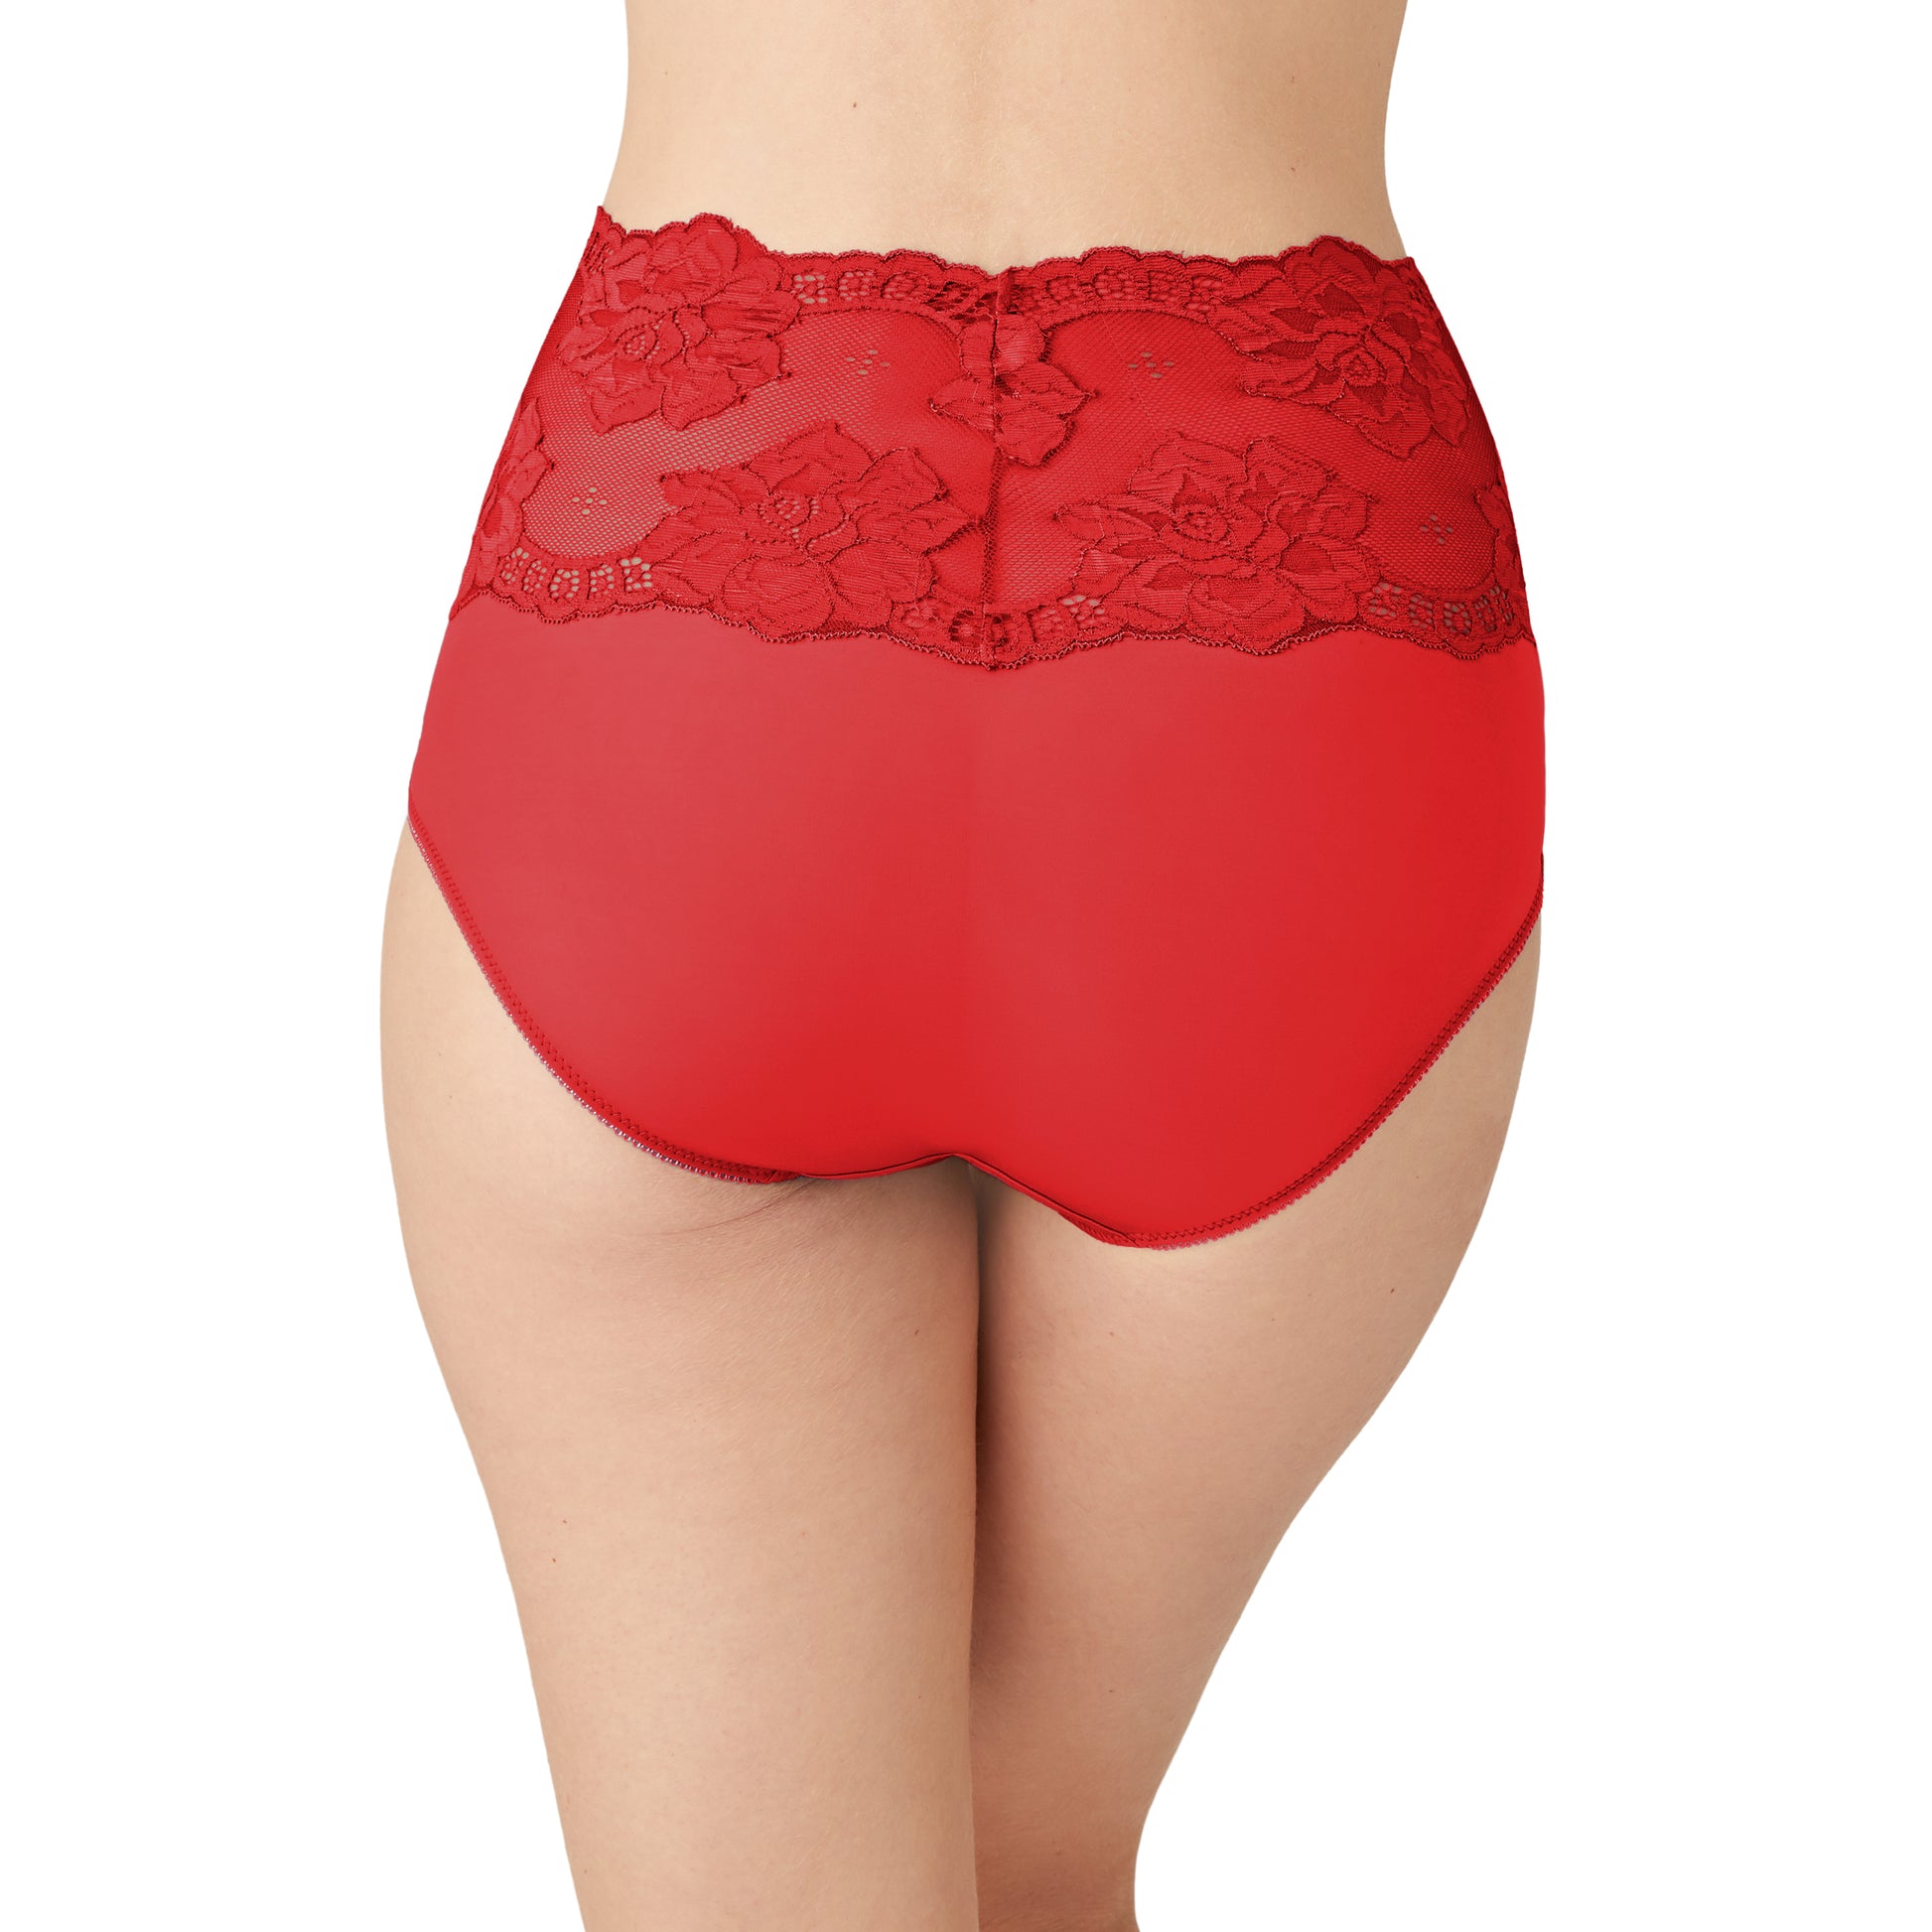 Light and Lacy Full Brief - 870363 - Barbados Cherry Bras & Lingerie - Underwear - Full Brief Wacoal   